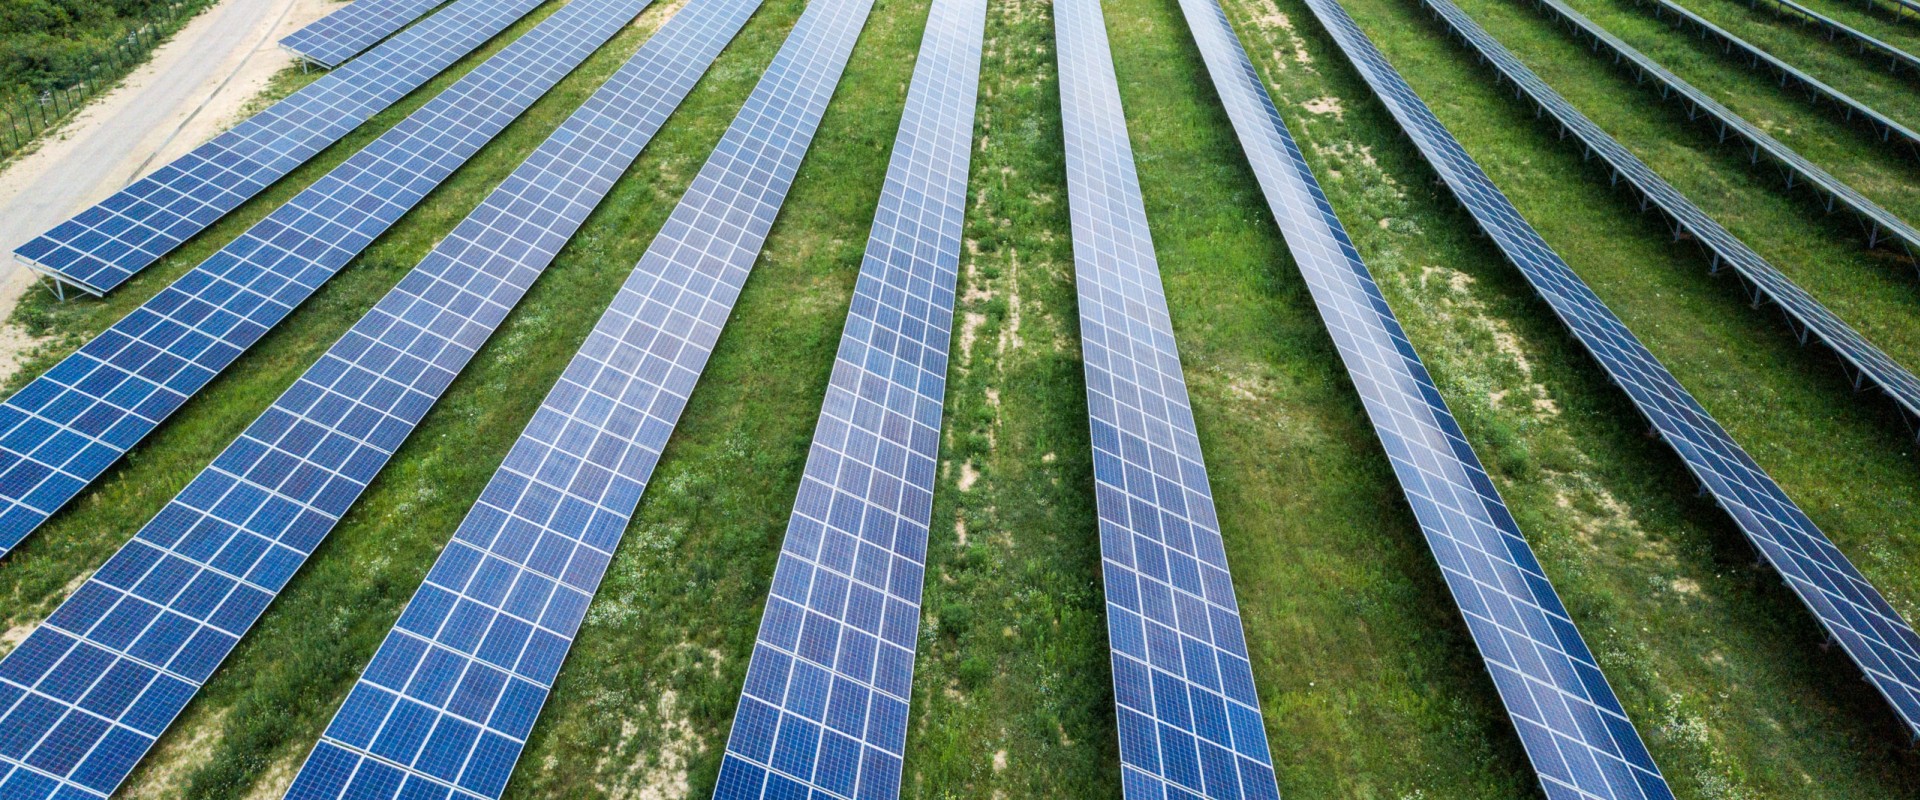 How solar power helps the environment?